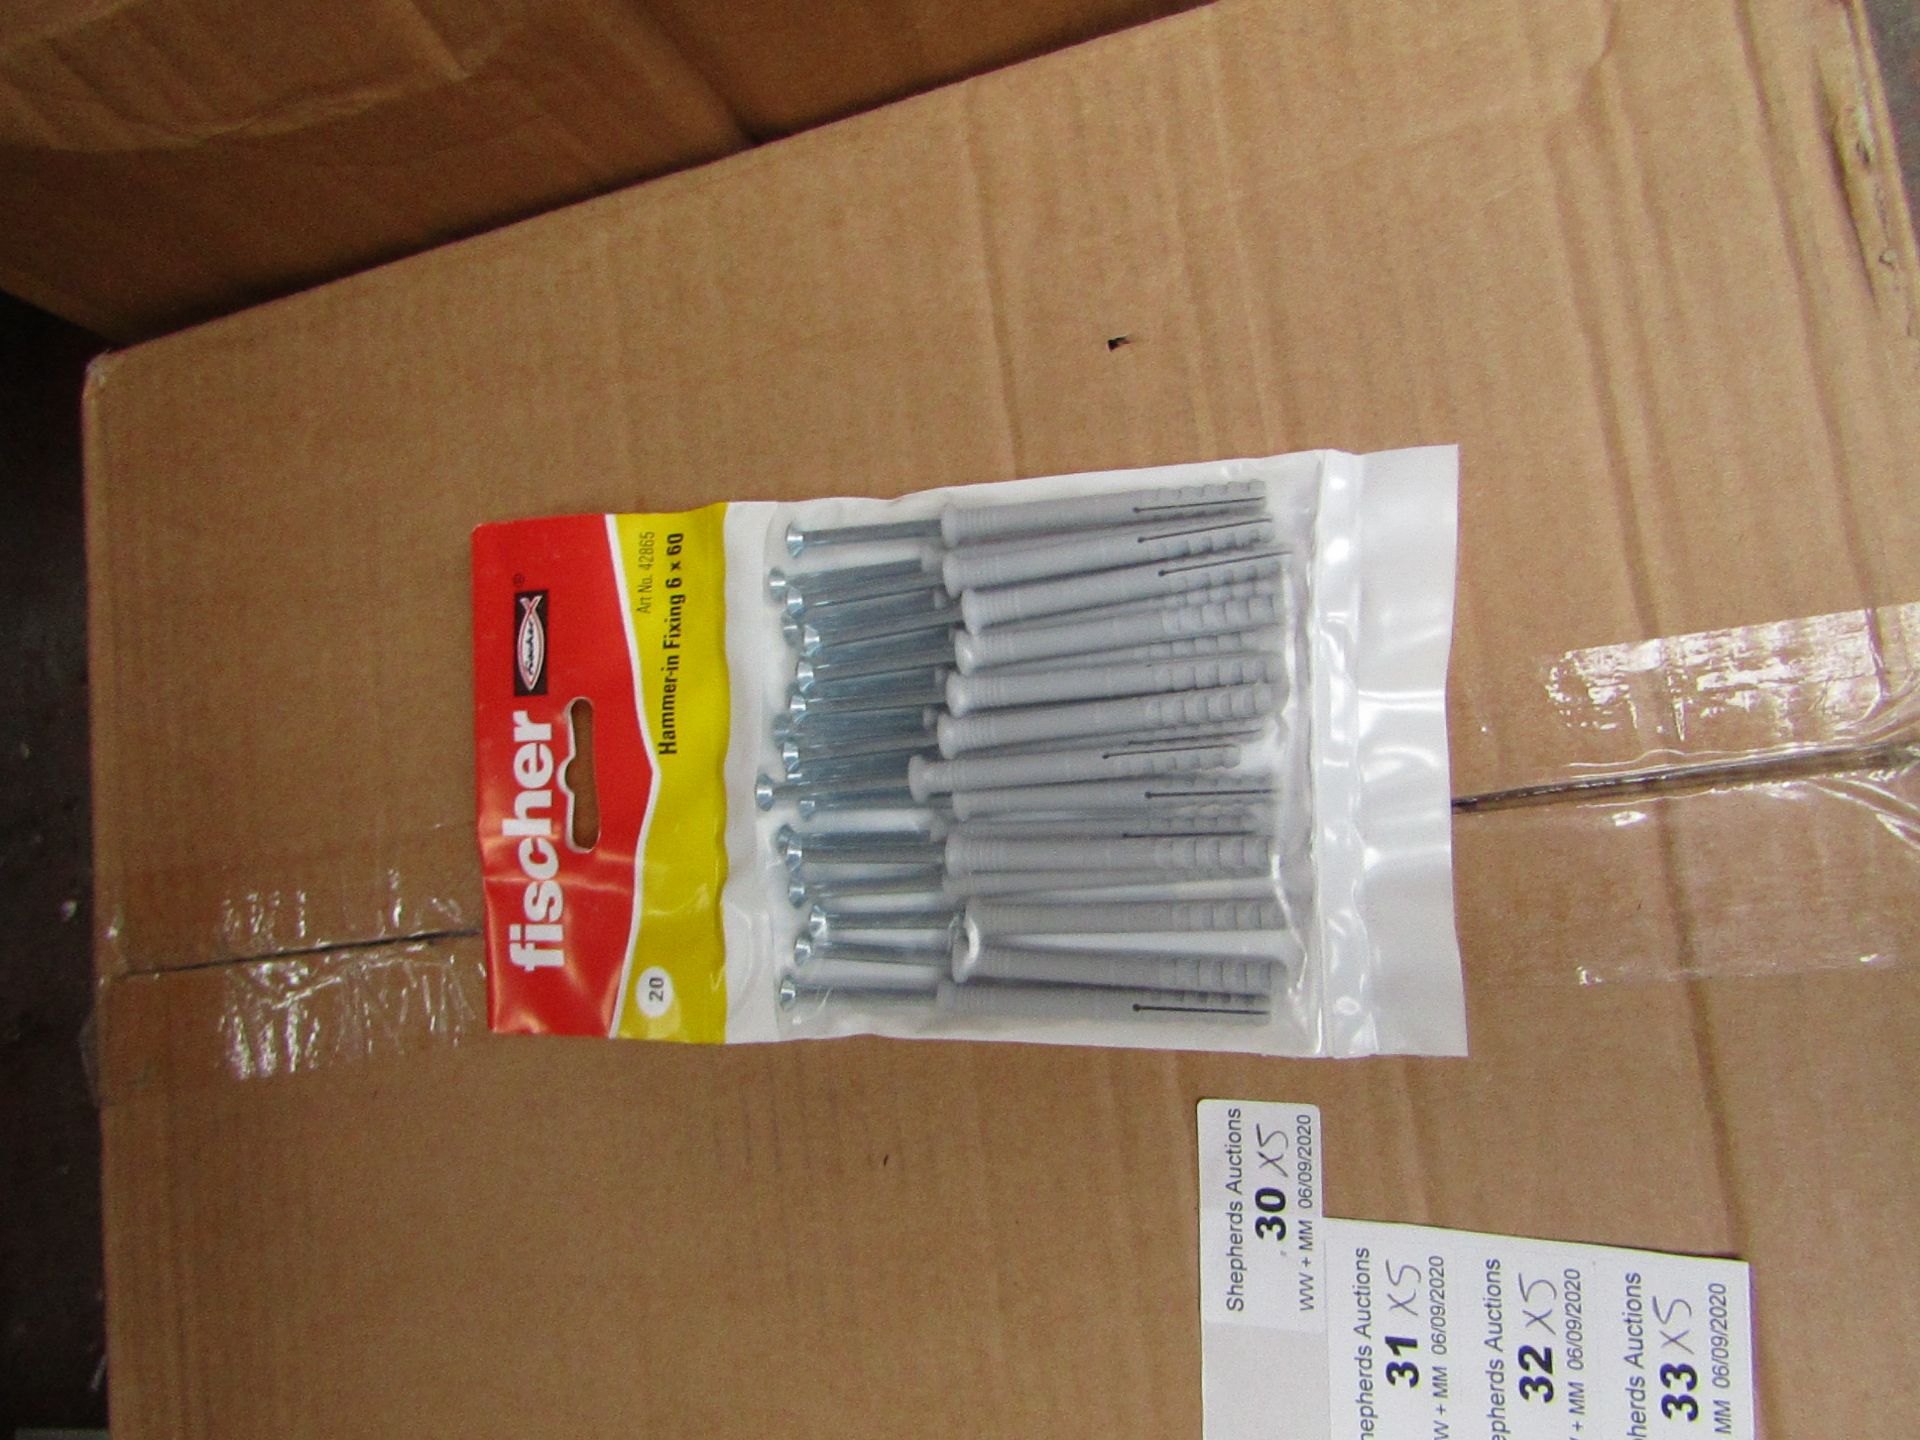 5x Fischer - Hammer- In Fixing 6 x 60 - (Packs of 20) - New & Packaged.